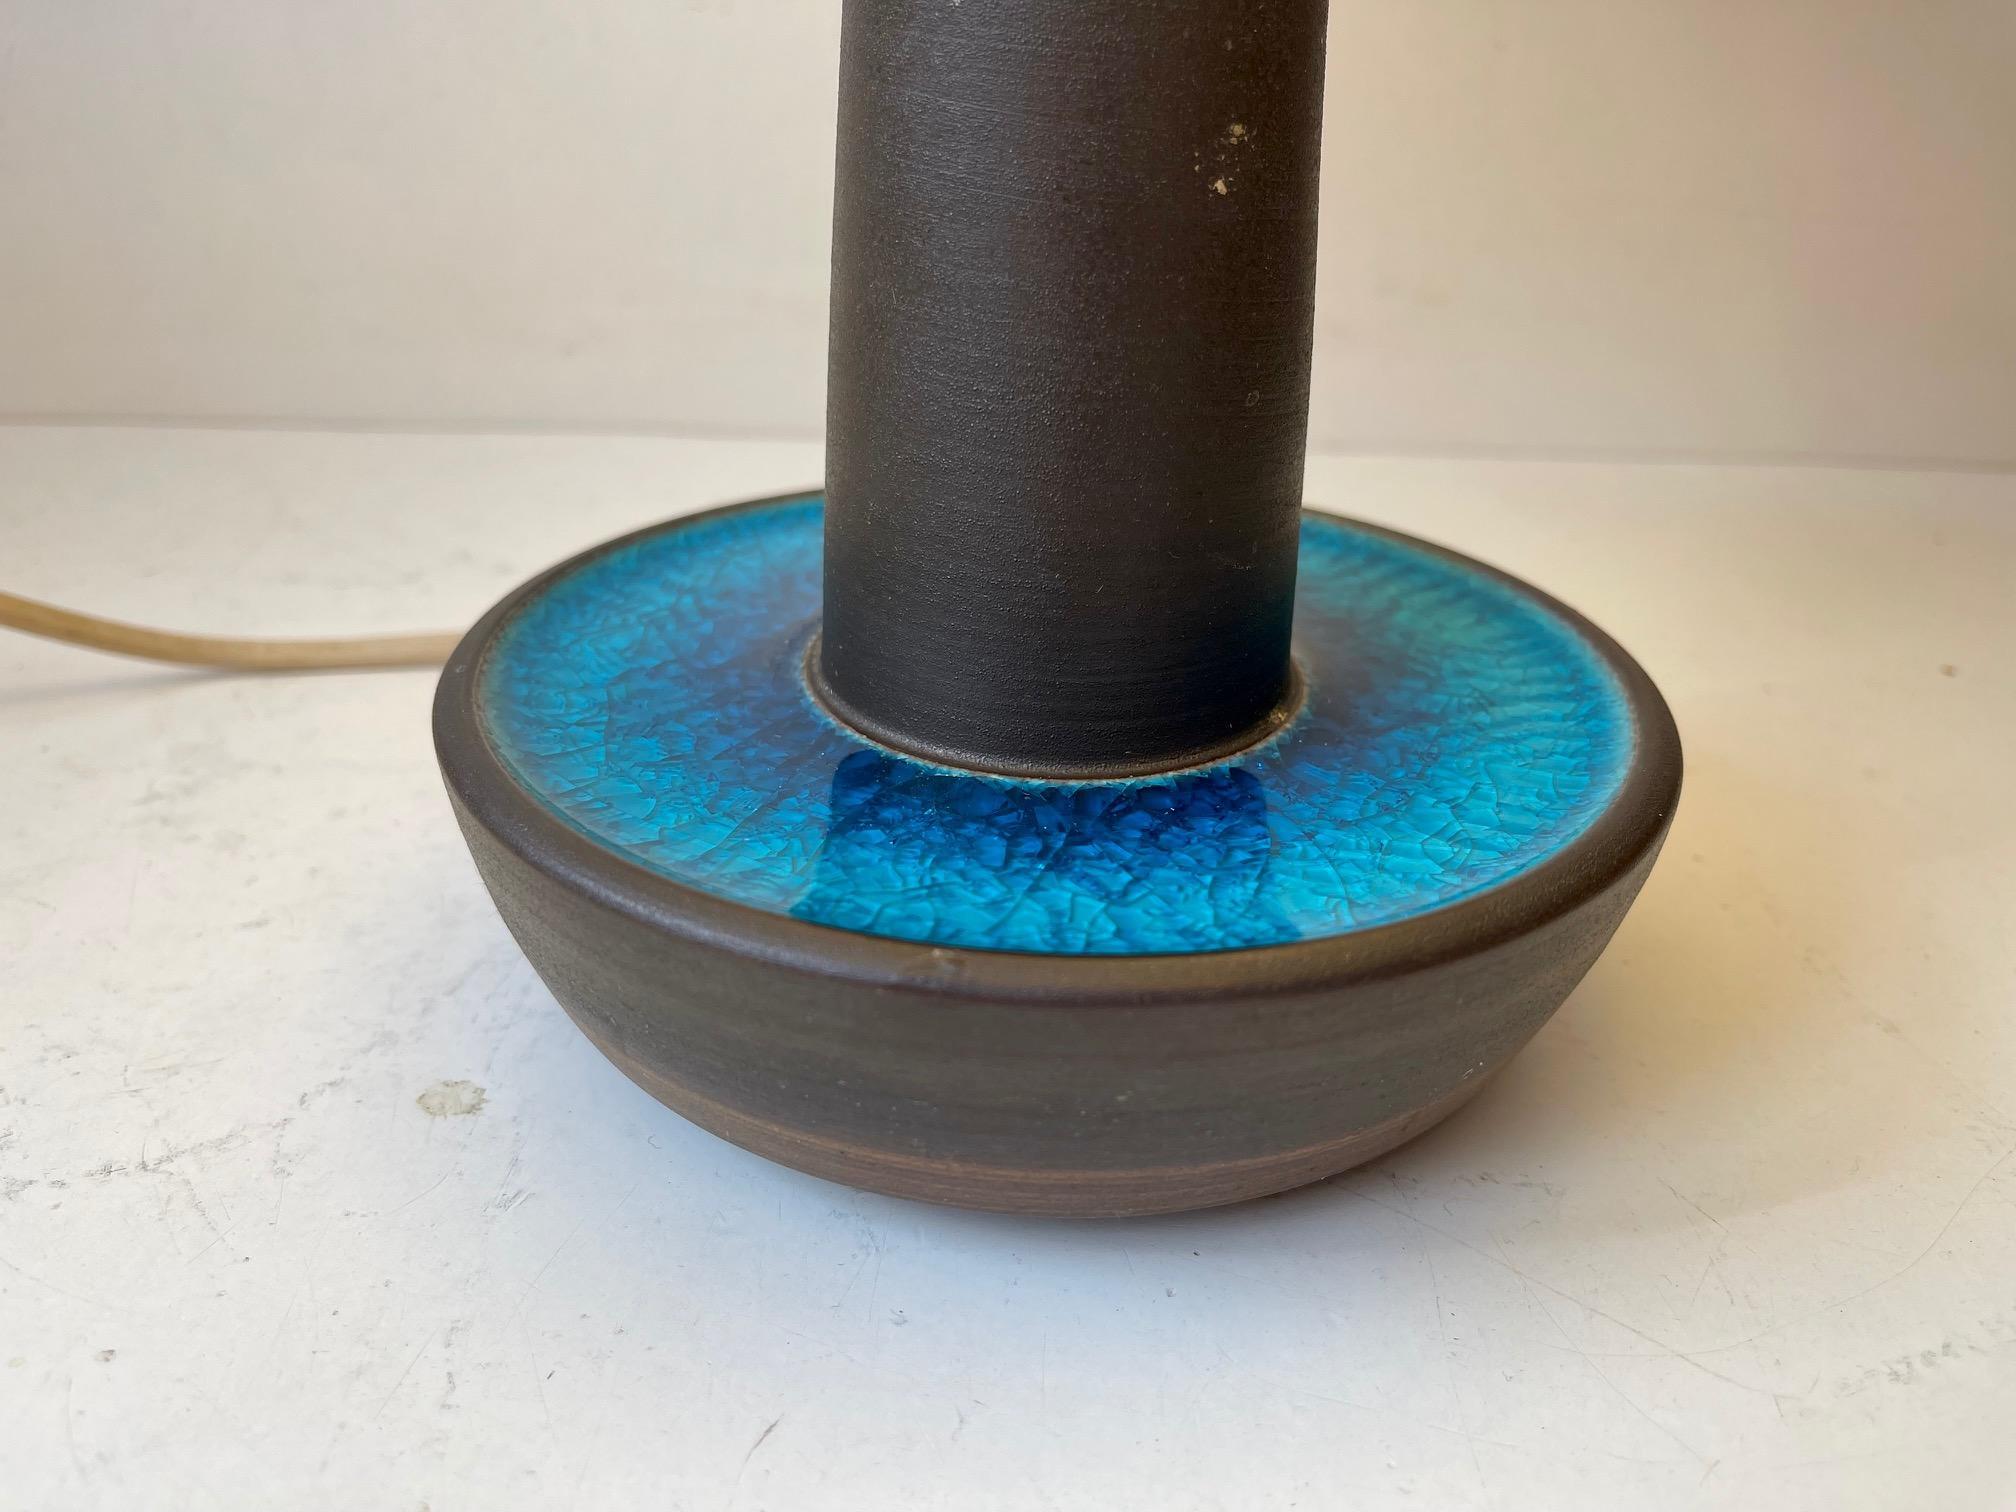 Danish Table Lamp with Turquoise Glaze by Einar Johansen, Søholm, 1960s For Sale